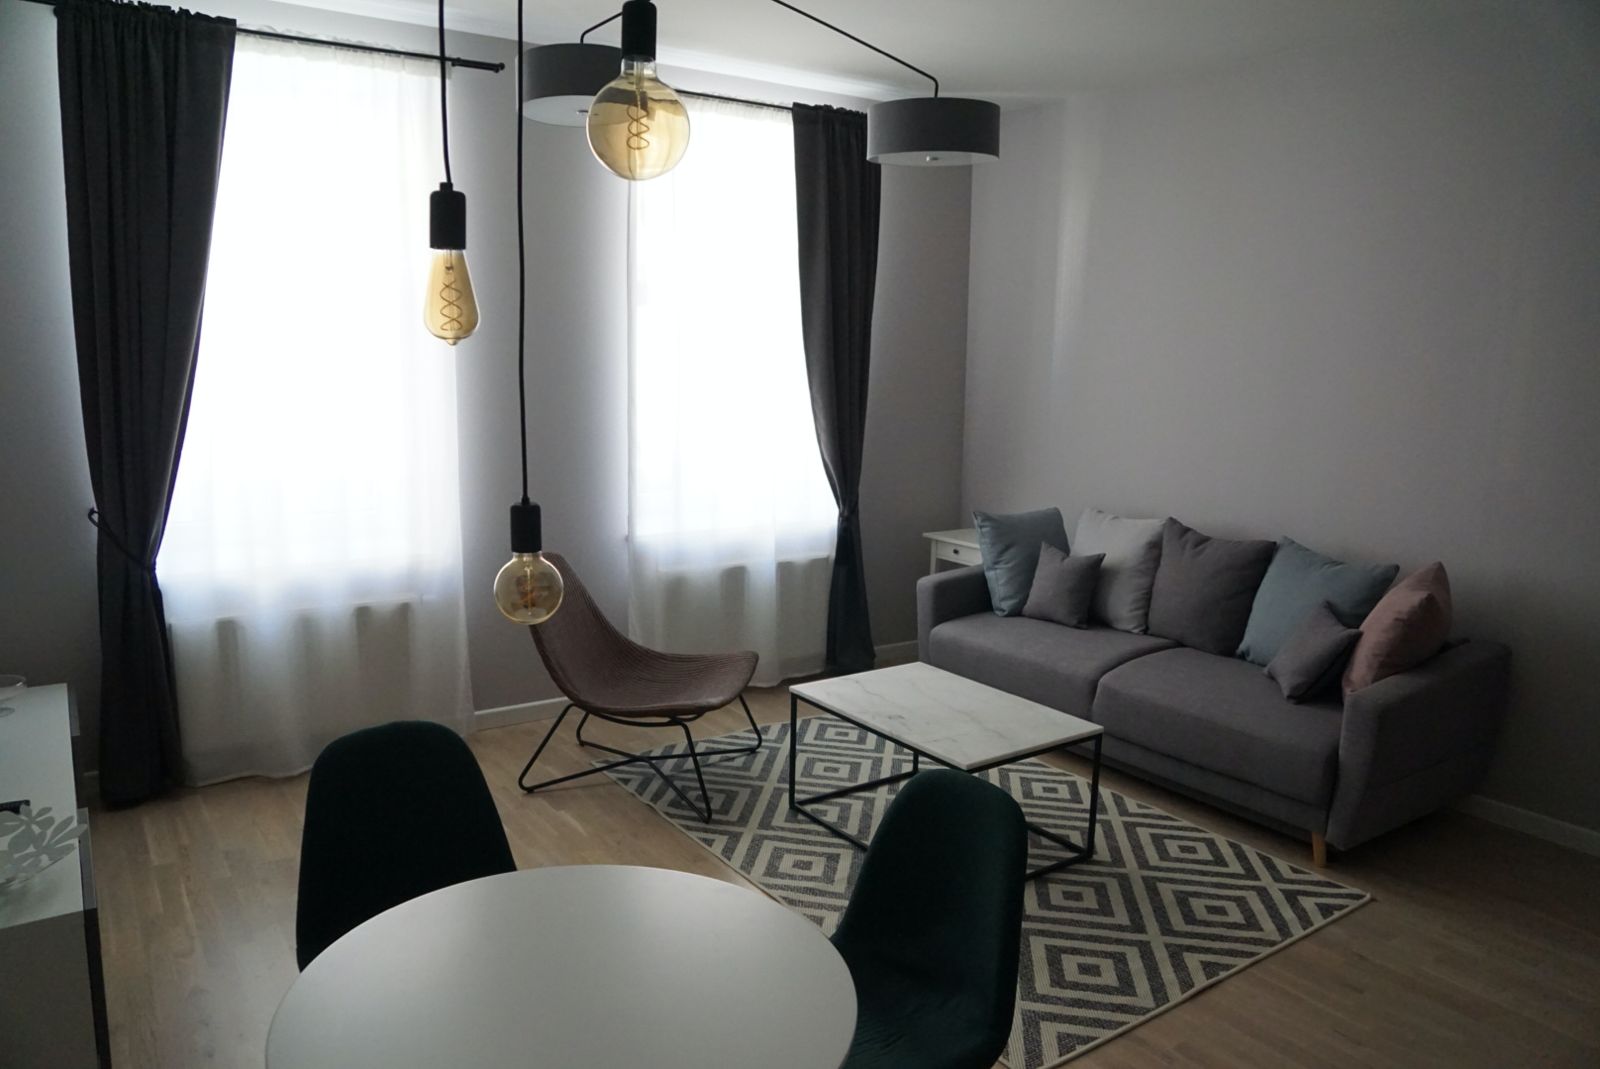 Apartment for rent, Barona street 24/26 - Image 1